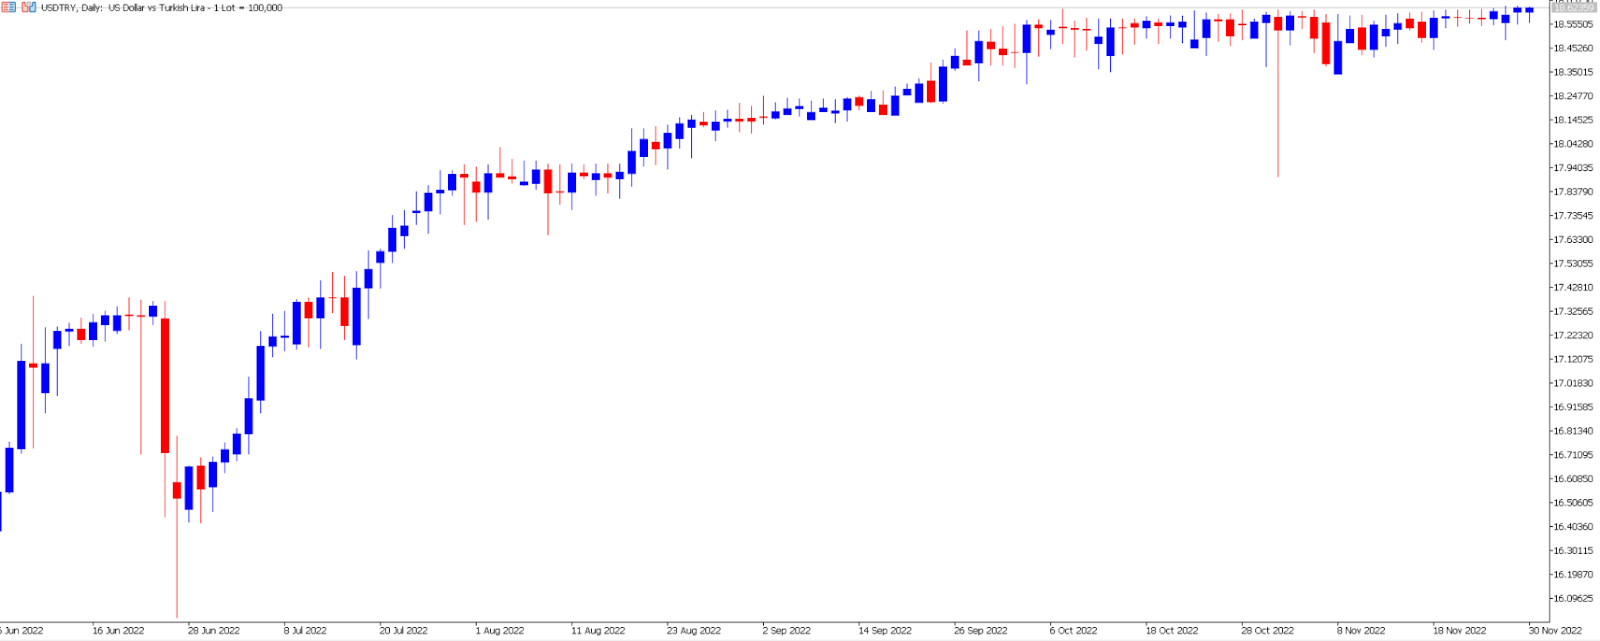 USD/TRY price chart.